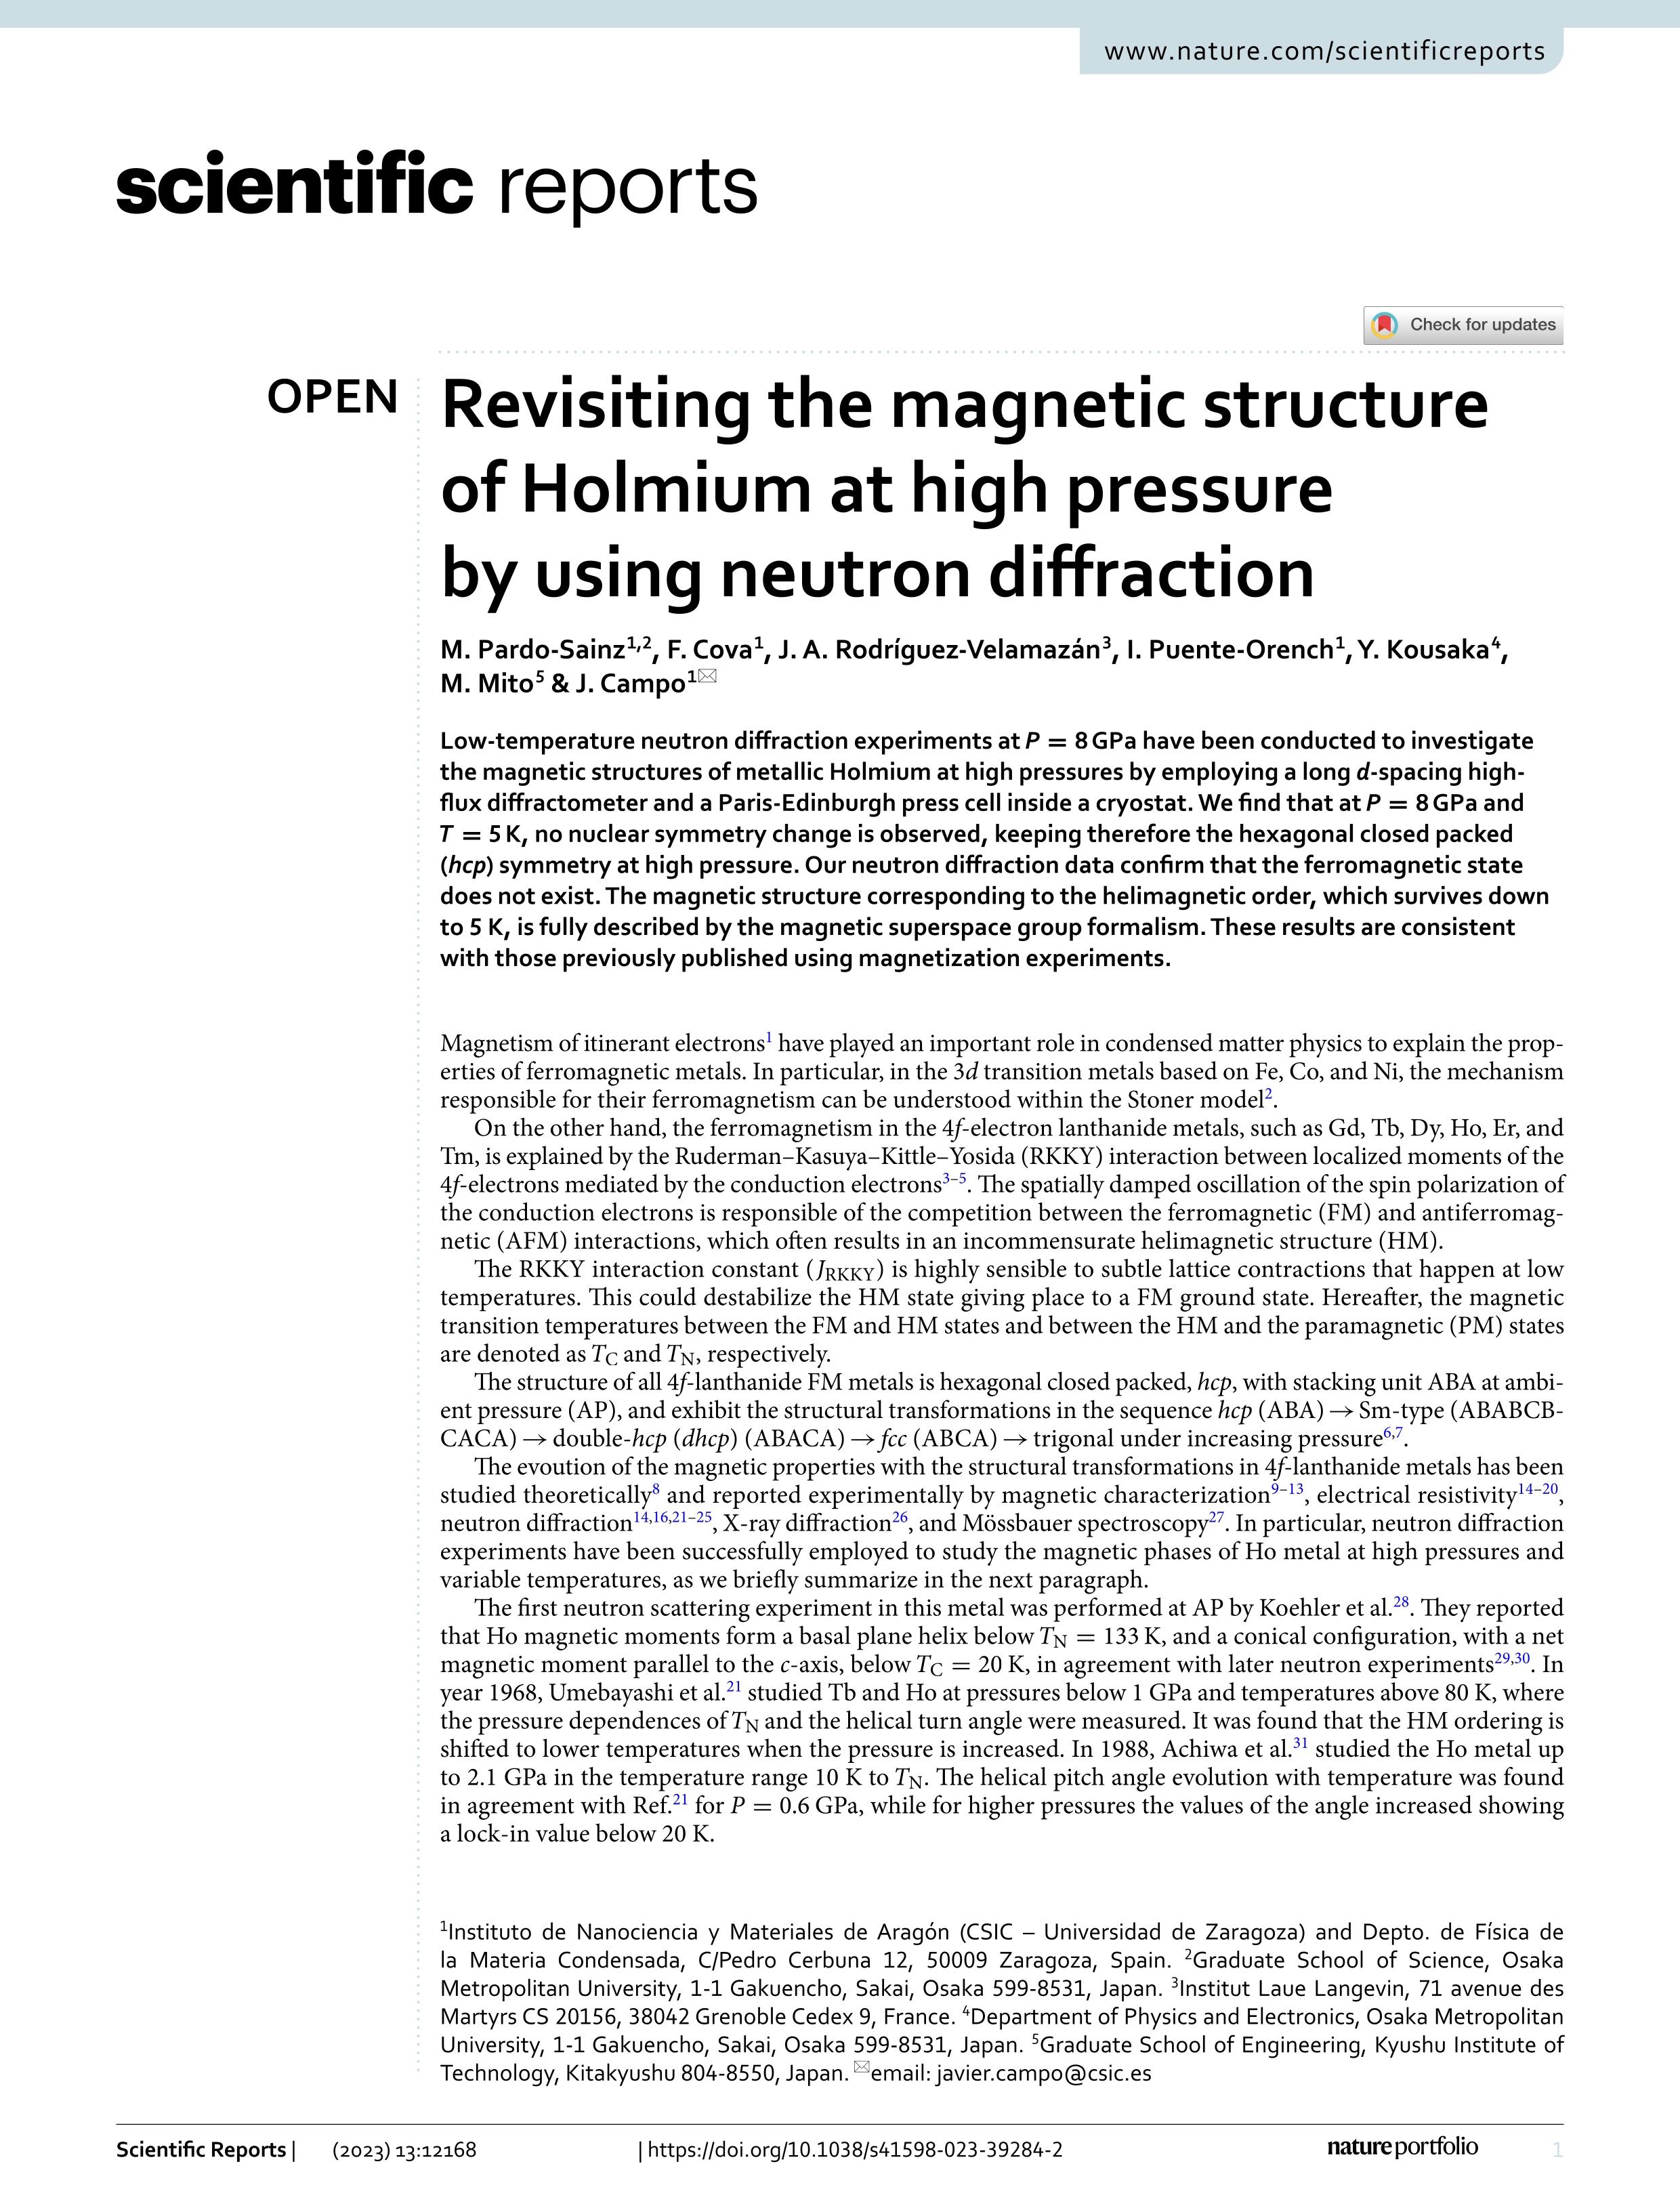 Revisiting the magnetic structure of Holmium at high pressure by using neutron diffraction